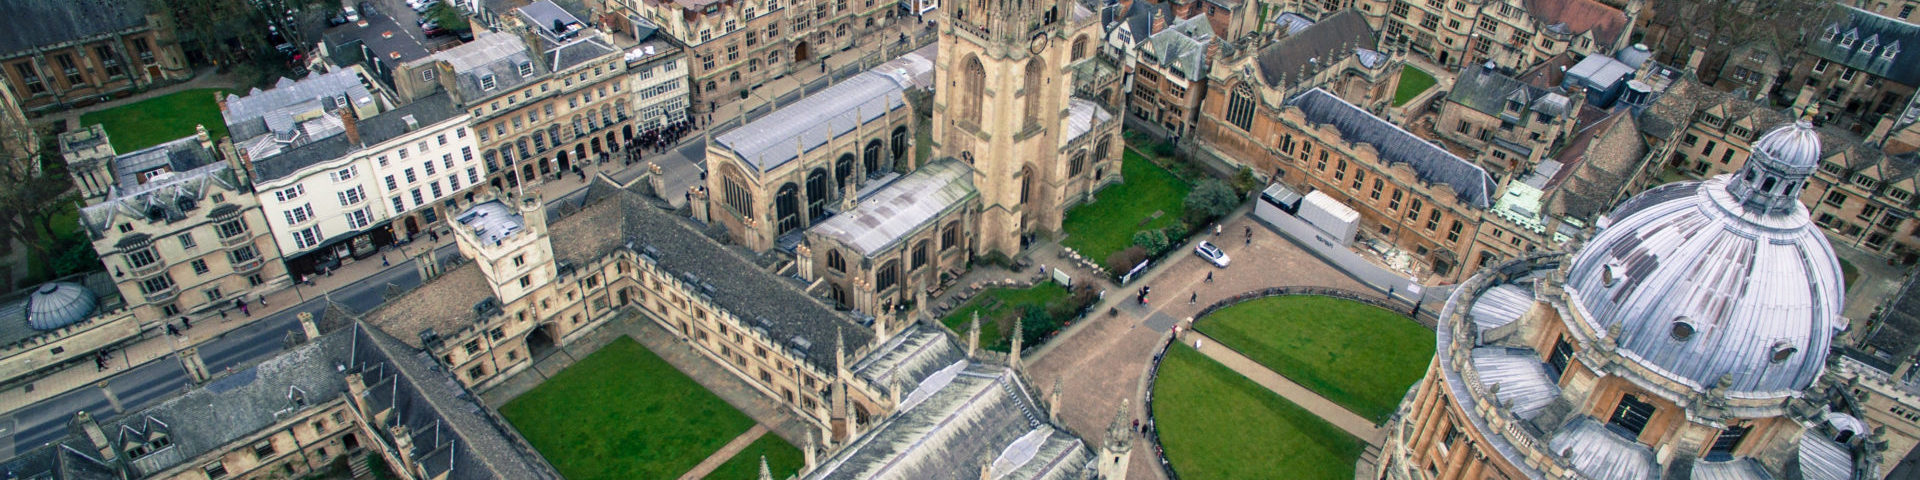 Bird's view of the historic city of Oxford